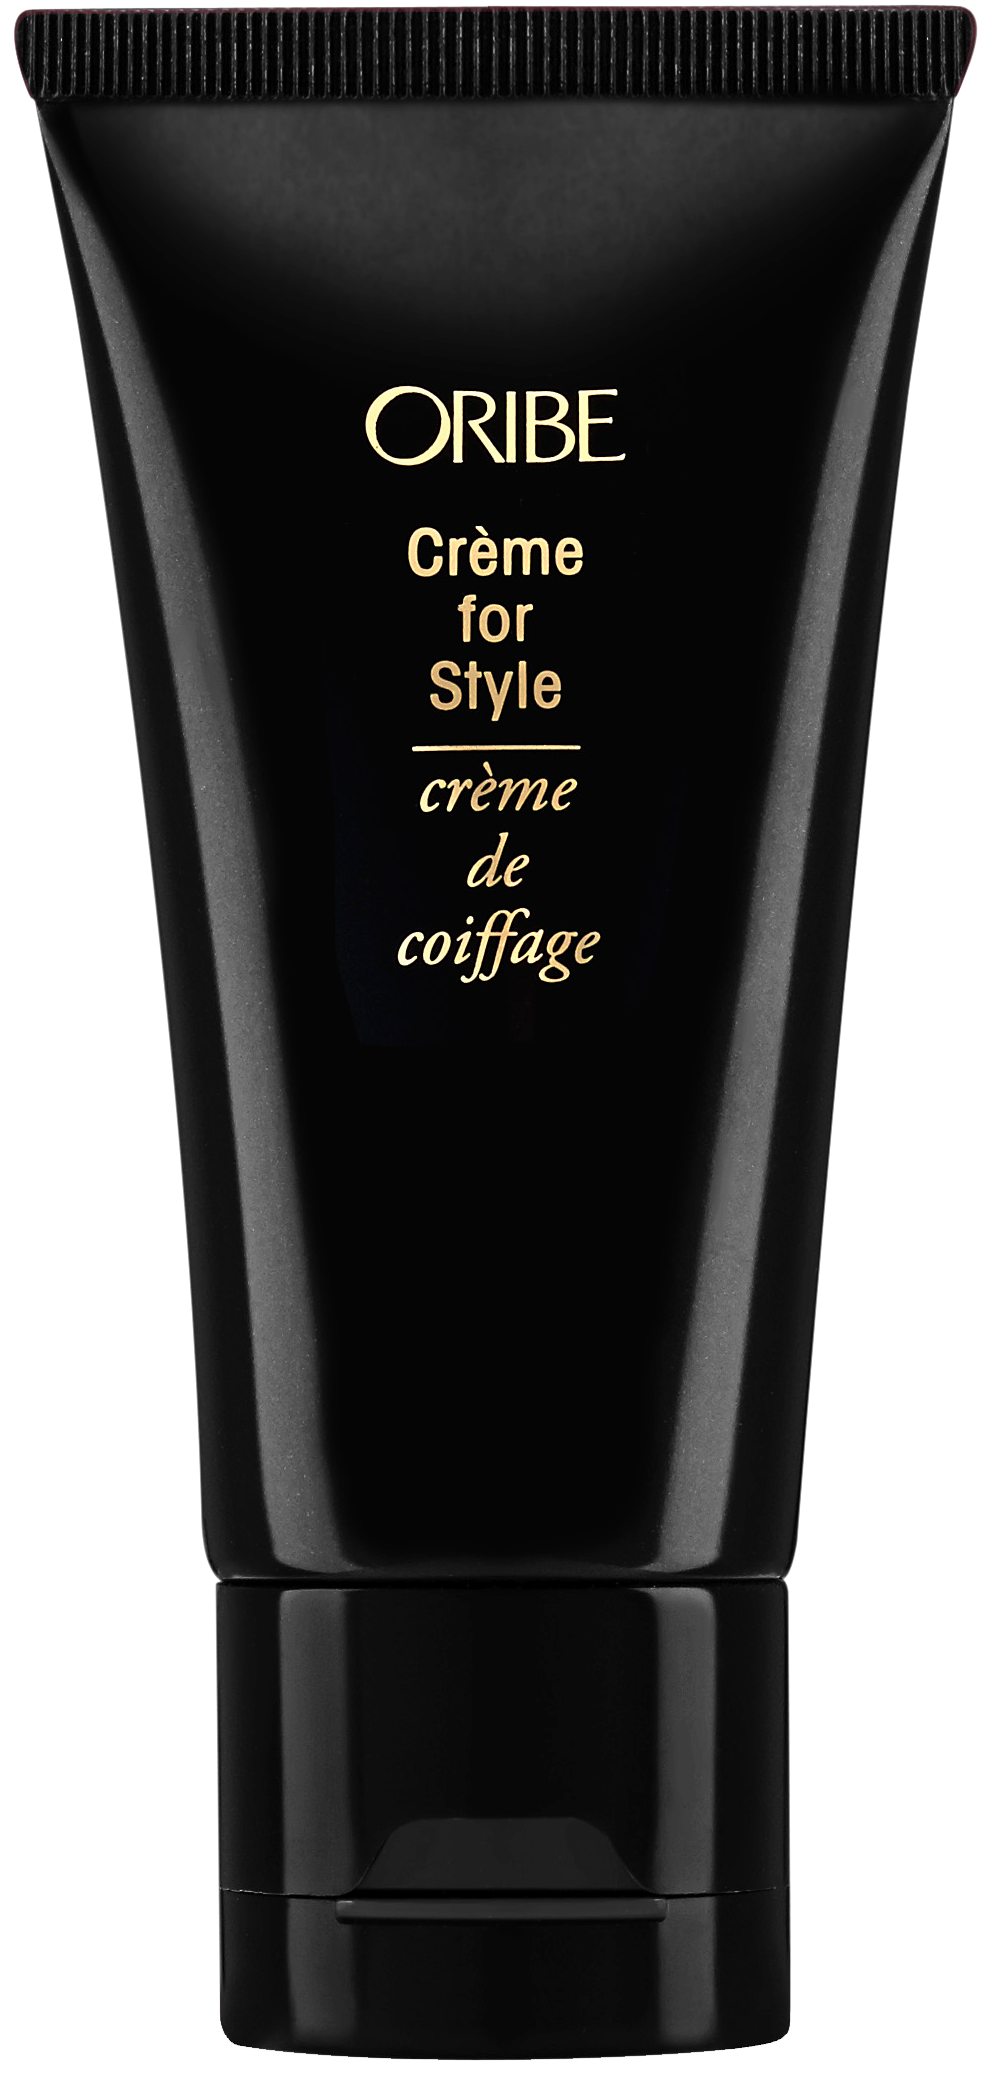 Oribe Creme for Style 50 ml.